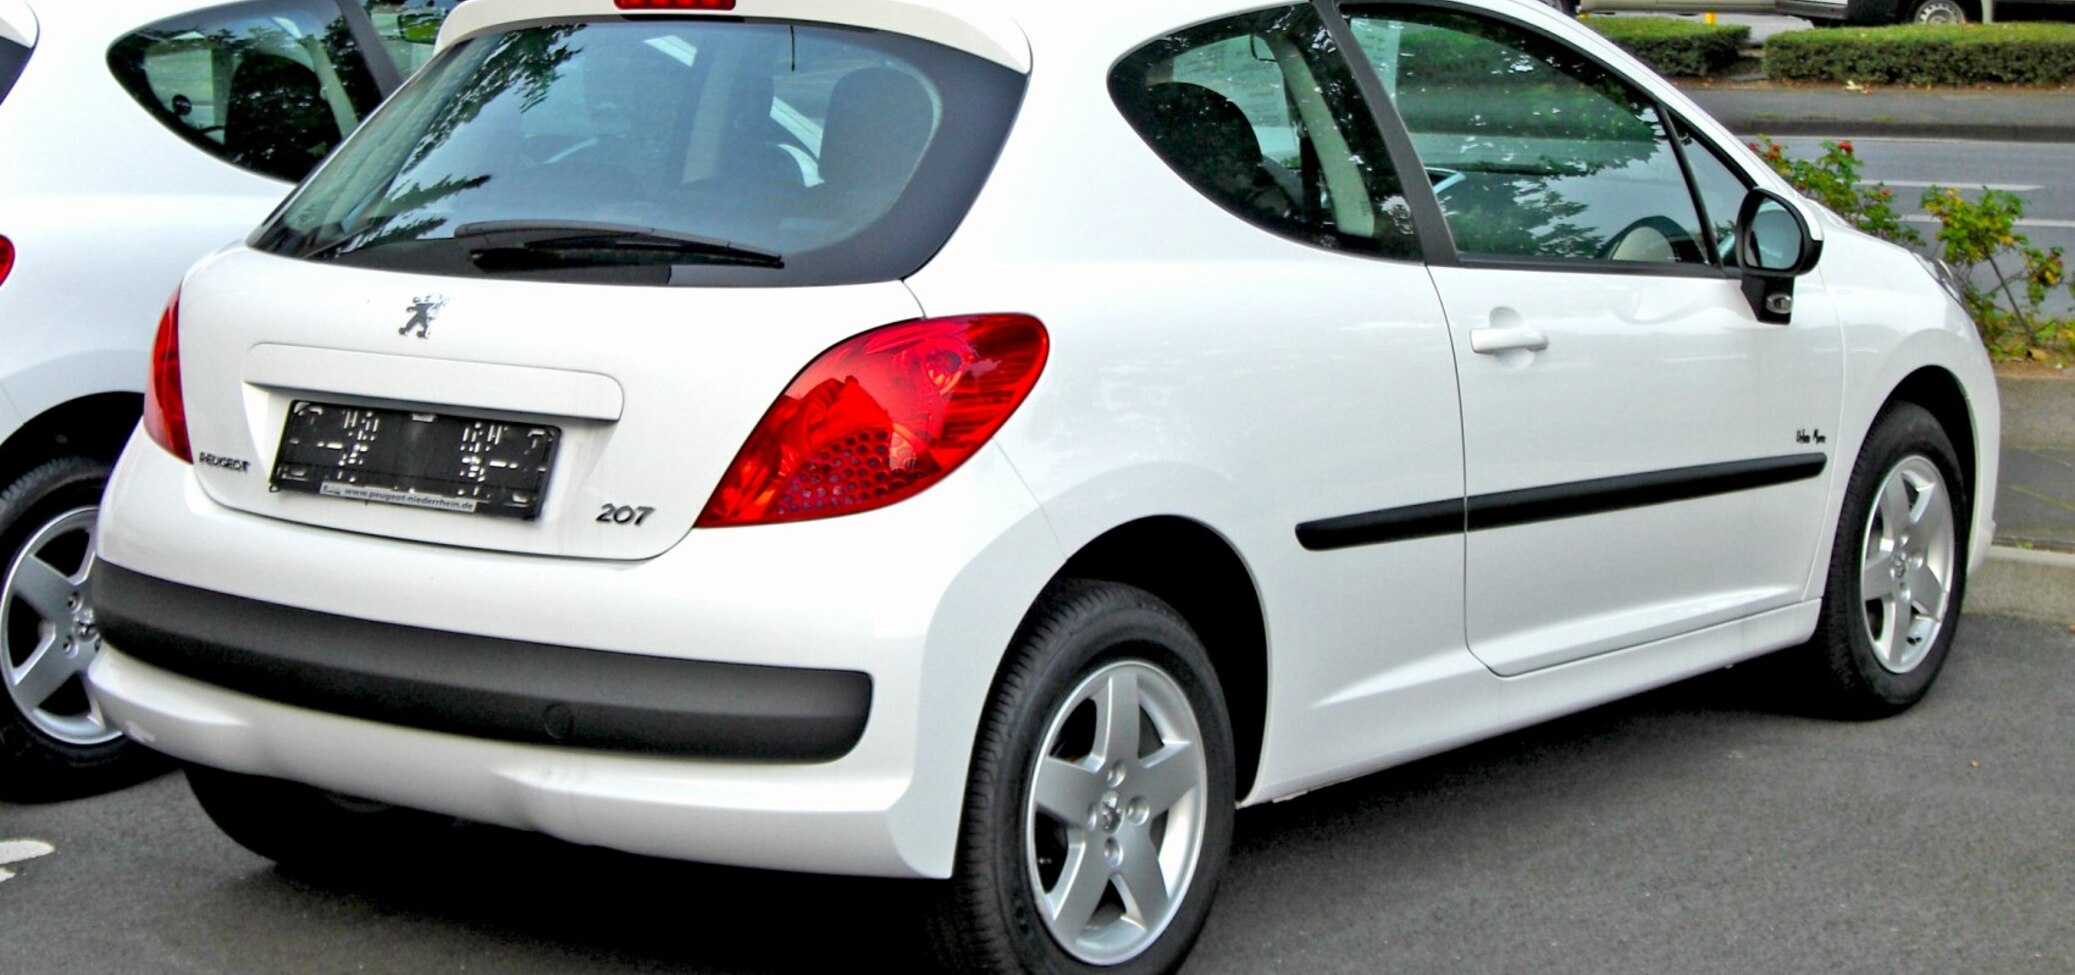 Peugeot 207 1.6 i 16V (120 Hp) Automatic 2007, 2008, 2009 specifications,  prices & reviews